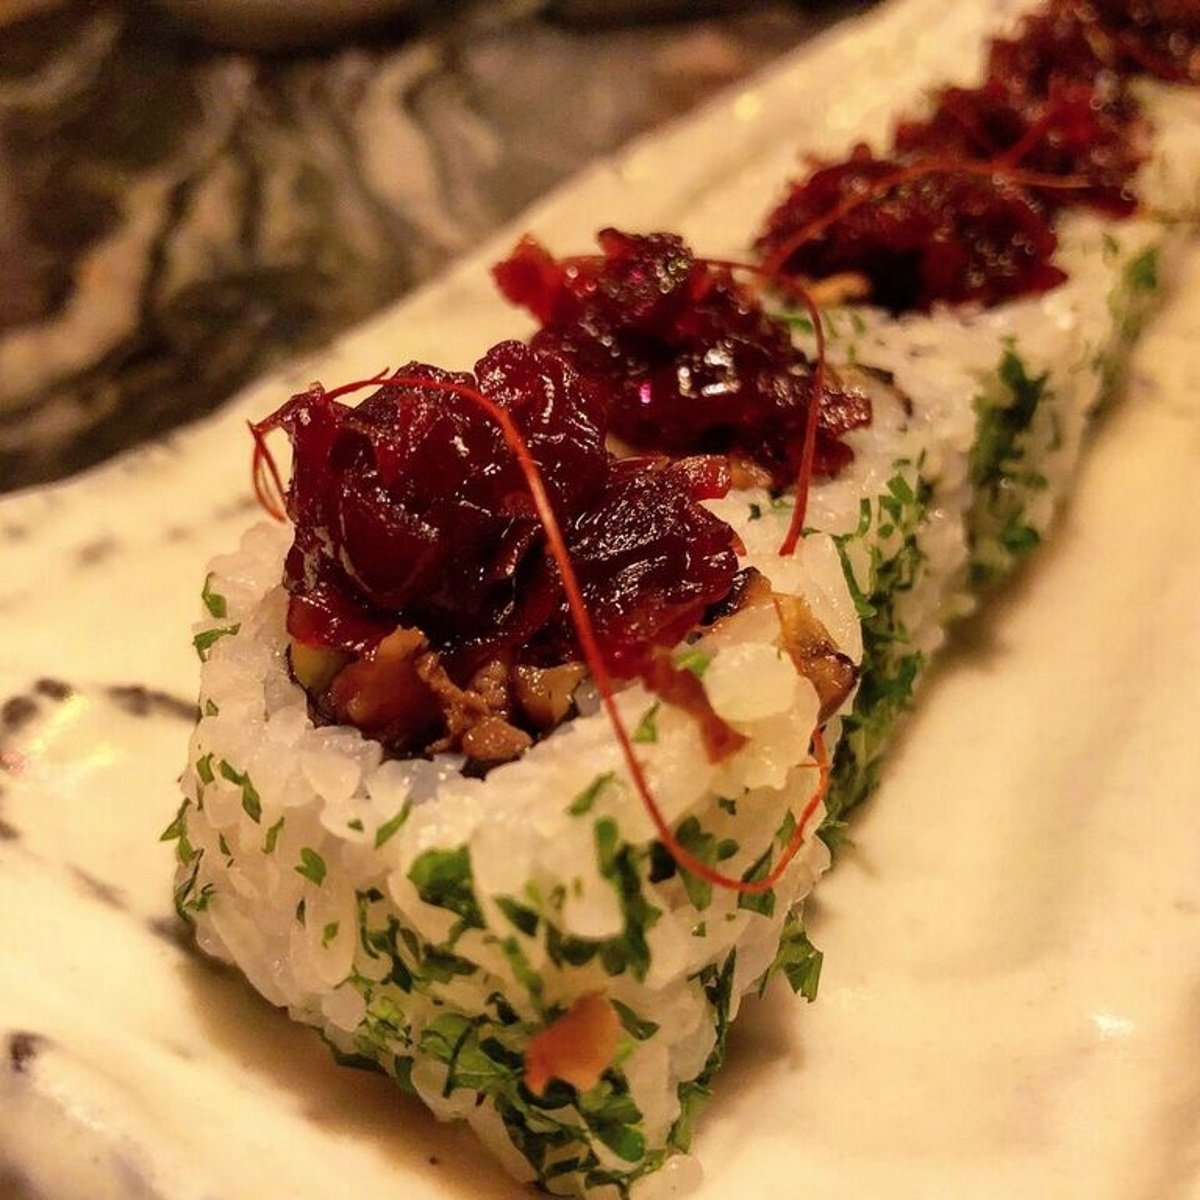 Barcelona restaurants: Robata Sushi & Grill, Japanese with a South American twist